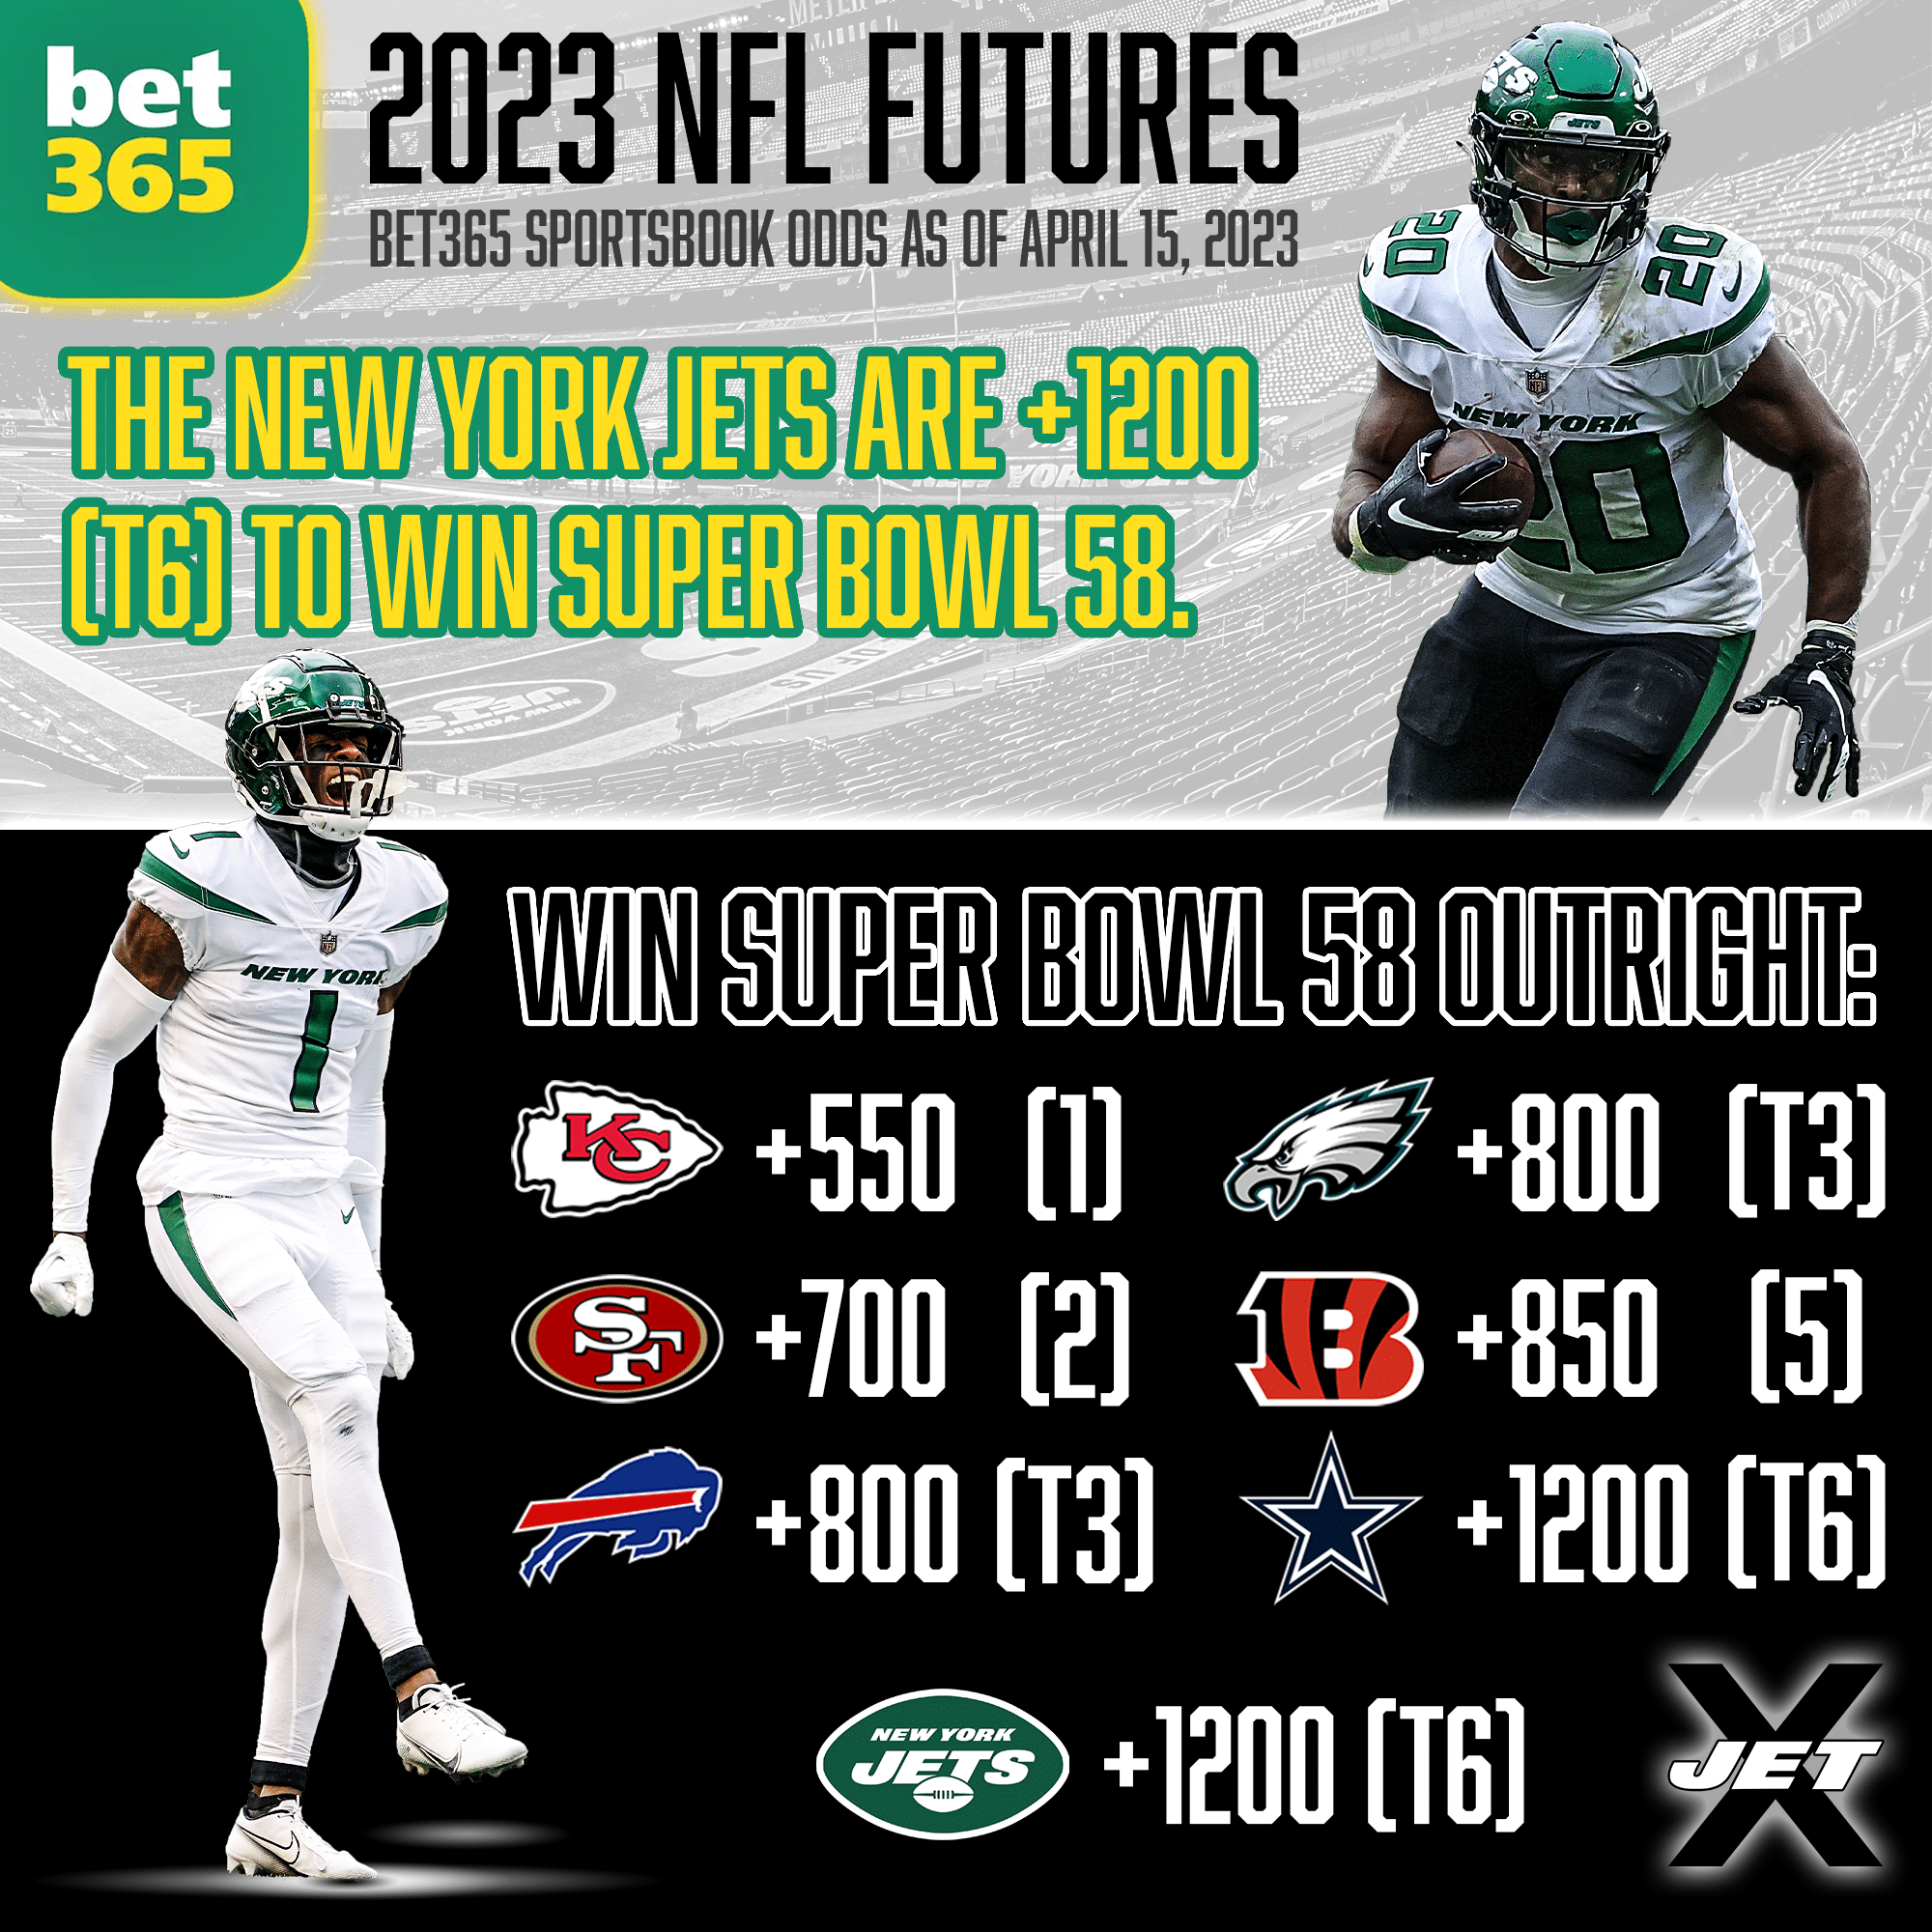 jets odds to win super bowl